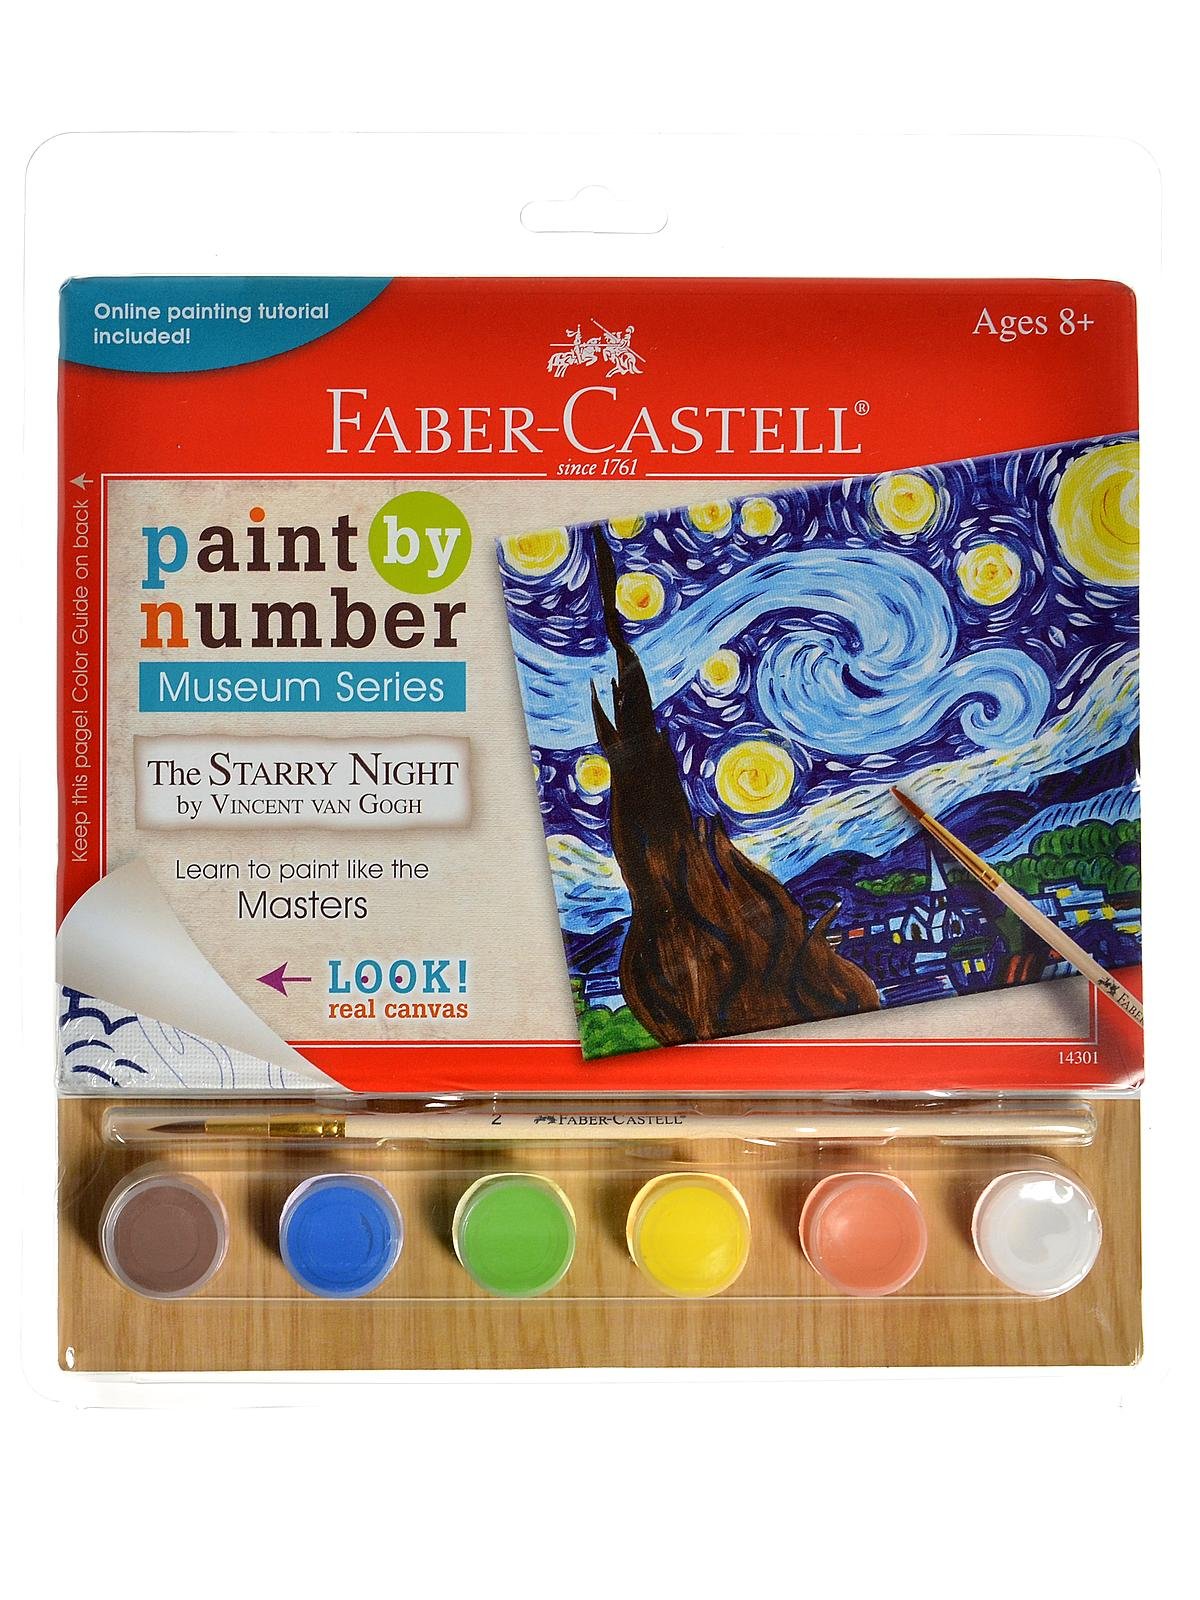 Faber-Castell - Paint by Number Museum Series